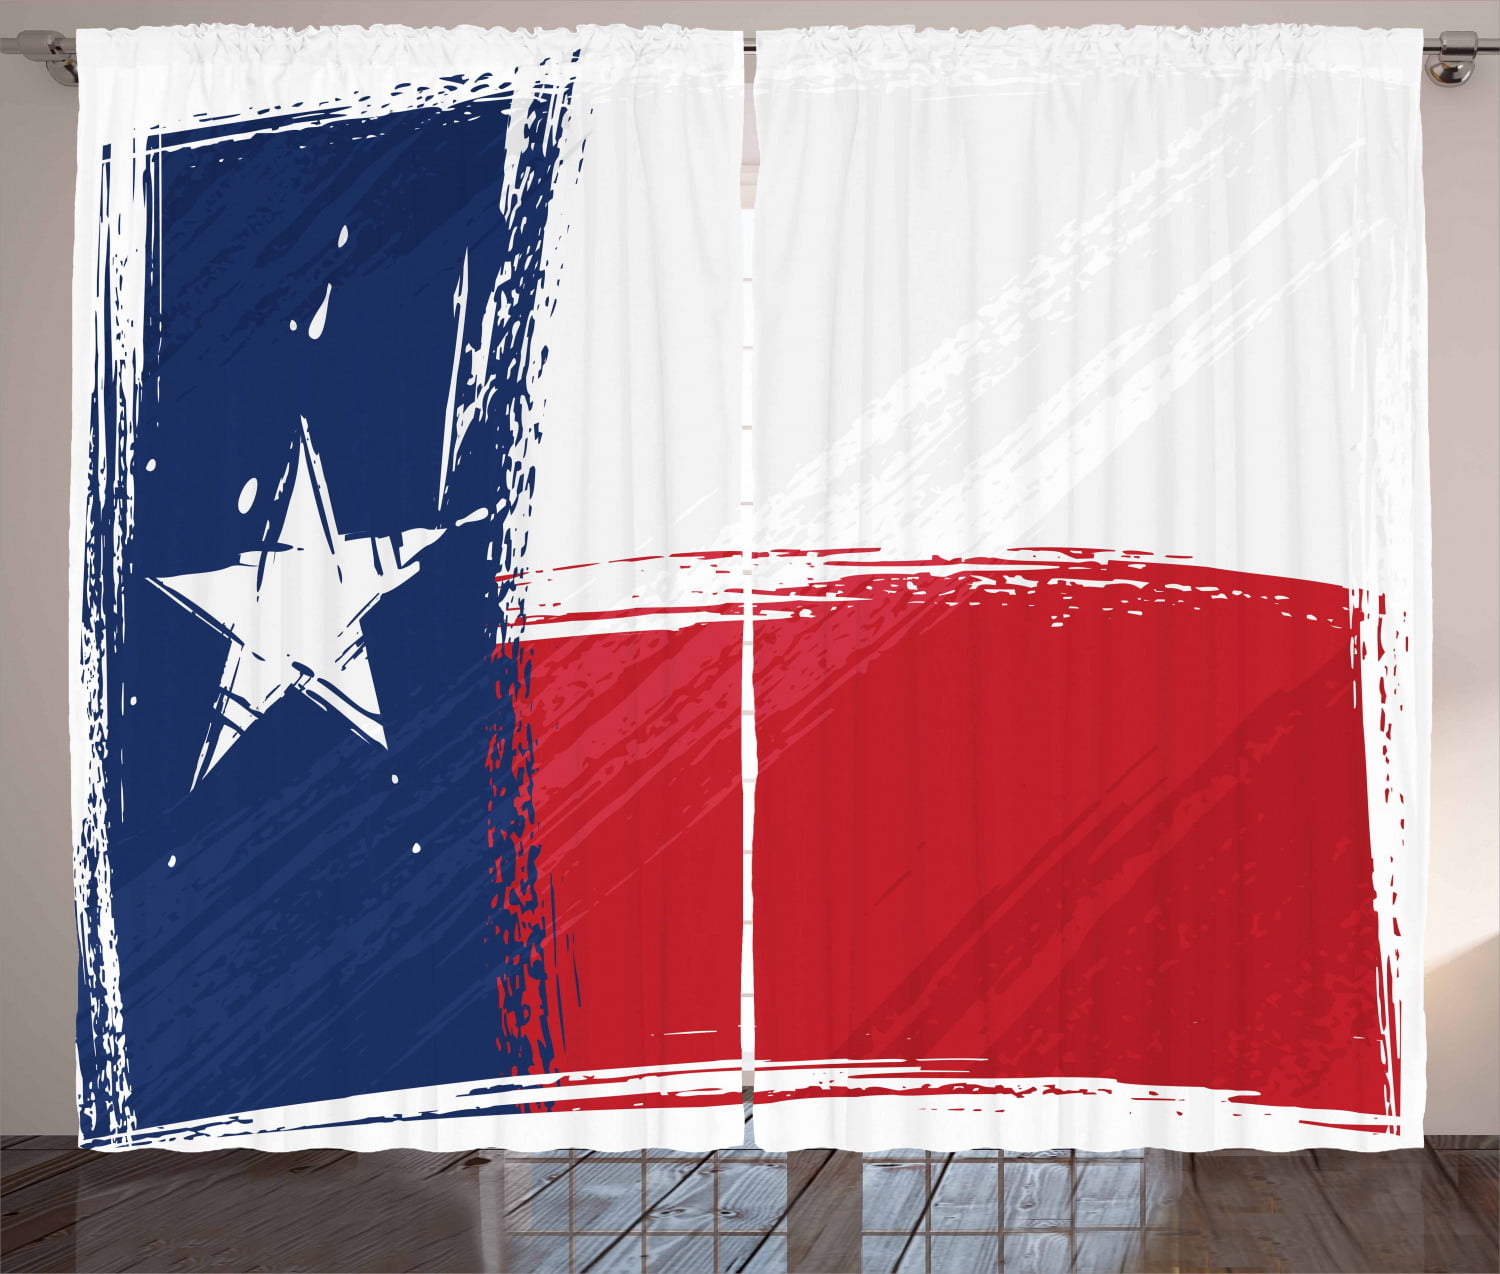 Texas Star Curtains 2 Panels Set, Flapping Texan Flag Lone Star Pattern  with Retro Effect Americana, Window Drapes for Living Room Bedroom, 108W X  84L Inches, Vermilion Beige Blue, by Ambesonne -